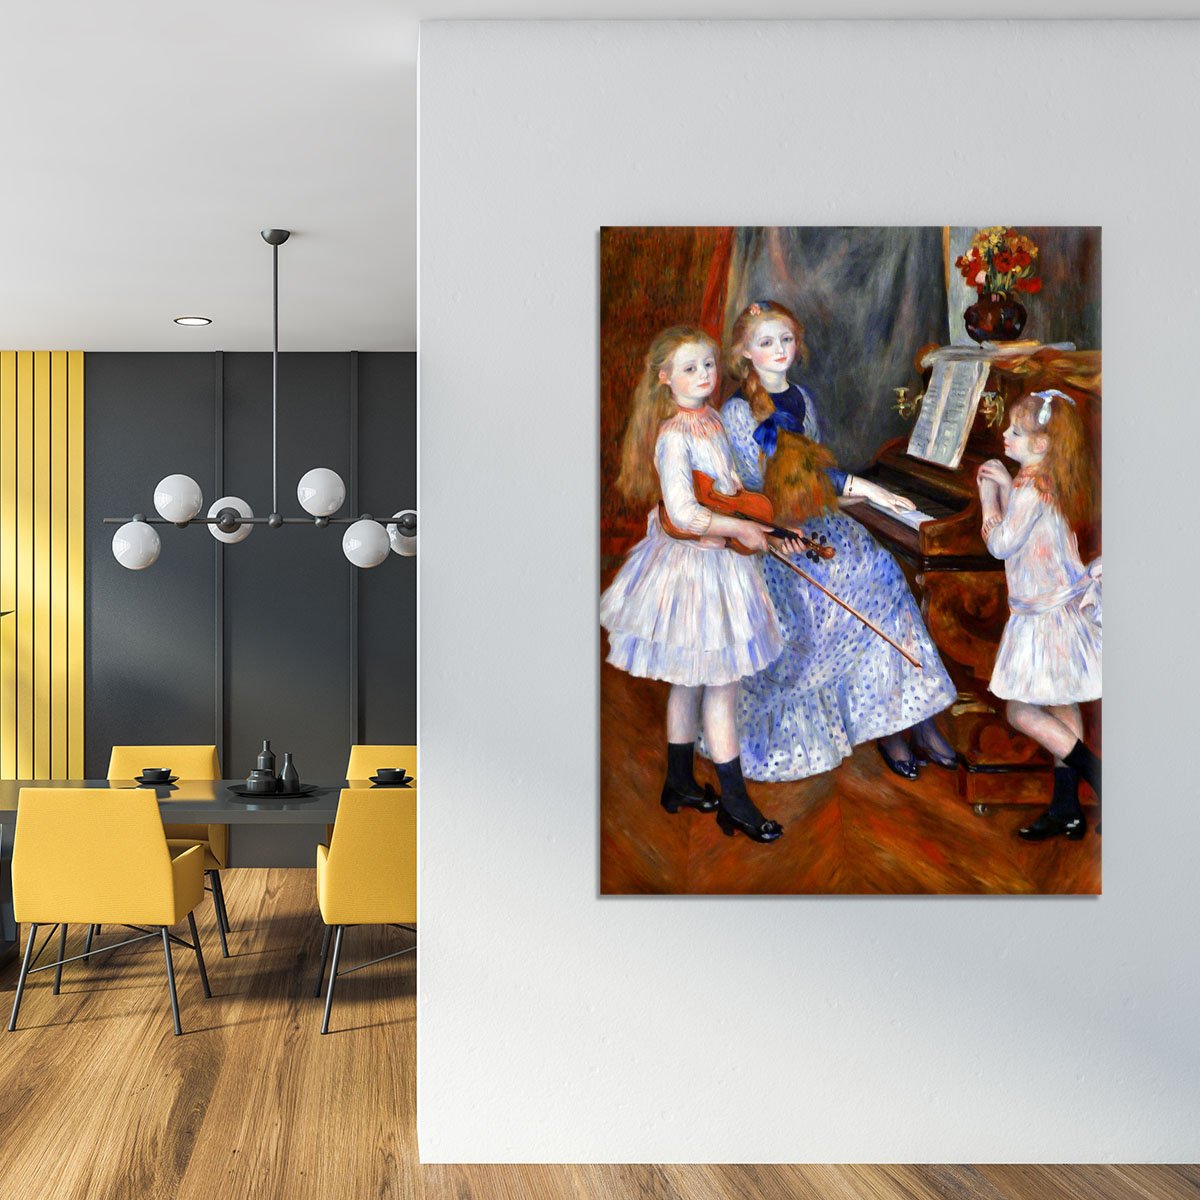 The daughters of Catulle Mendes by Renoir Canvas Print or Poster